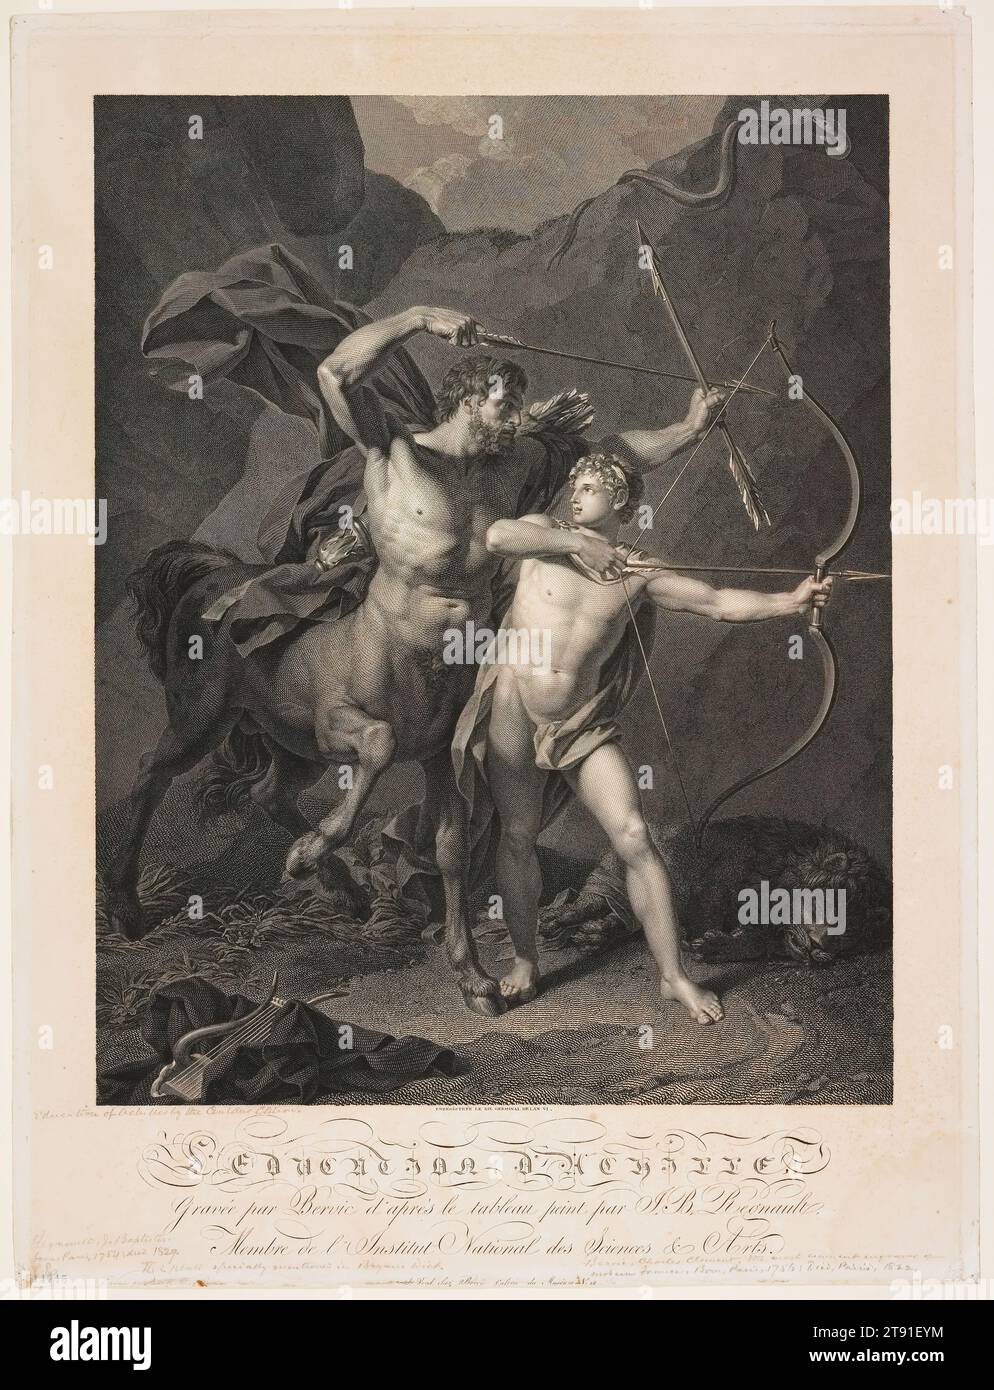 The Education of Achilles by the Centaur Chiron, 18th century, Charles-Clément Bervic; Artist: after Jean Baptiste Regnault, French, 1756 - 1822, 18 x 14 3/16 in. (45.72 x 36.04 cm) (image)22 3/4 x 17 1/4 in. (57.79 x 43.82 cm) (sheet), Engraving, France, 18th century Stock Photo